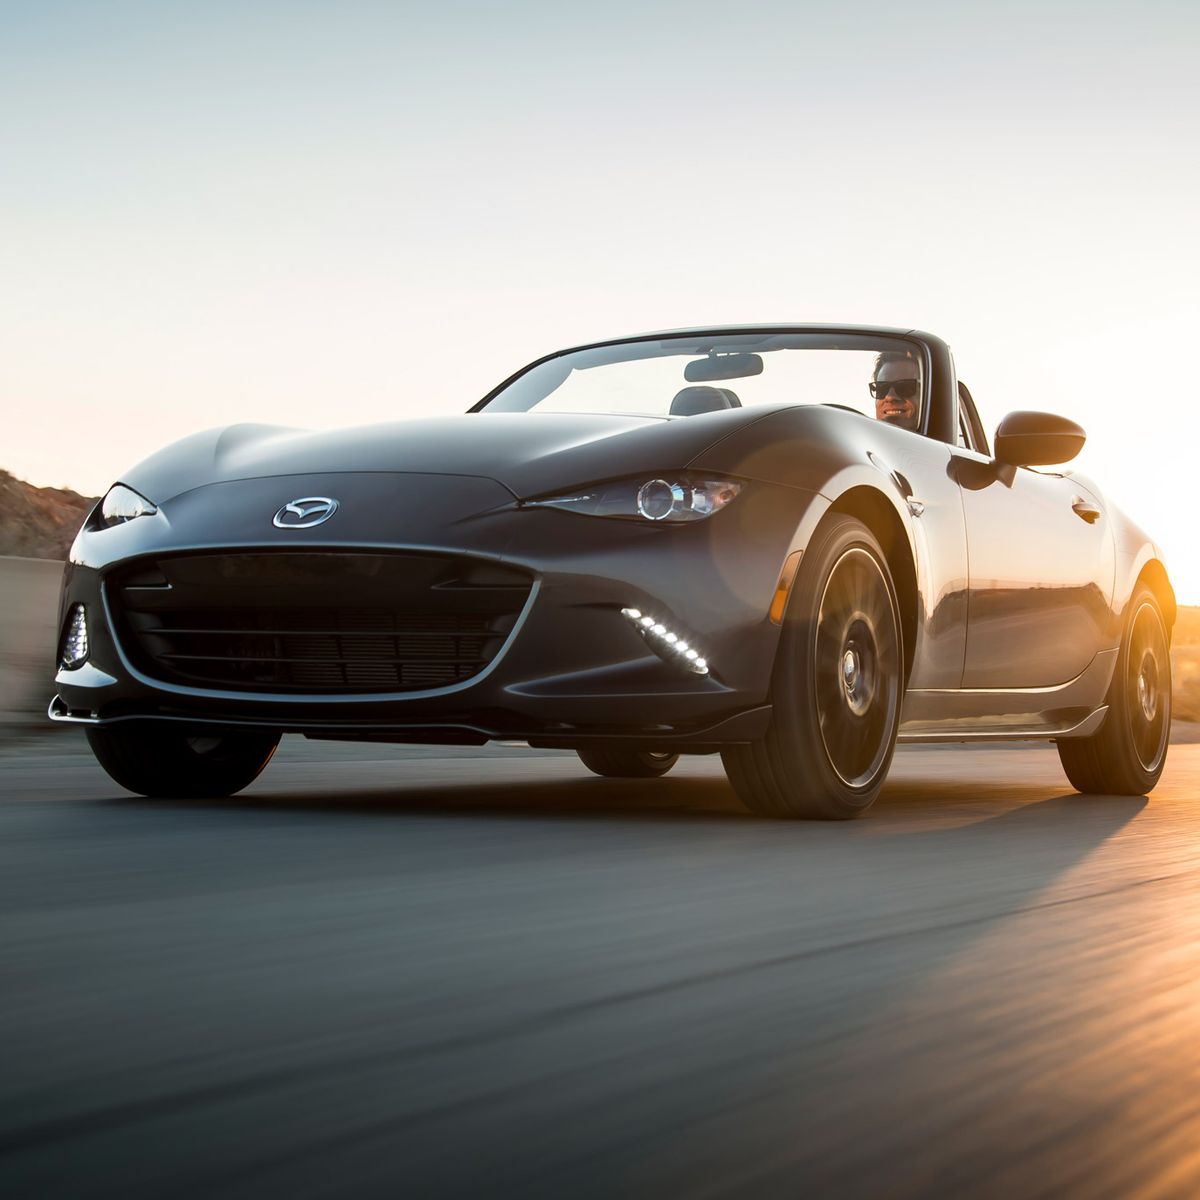 2016 Mazda MX-5 ND 2.0L review